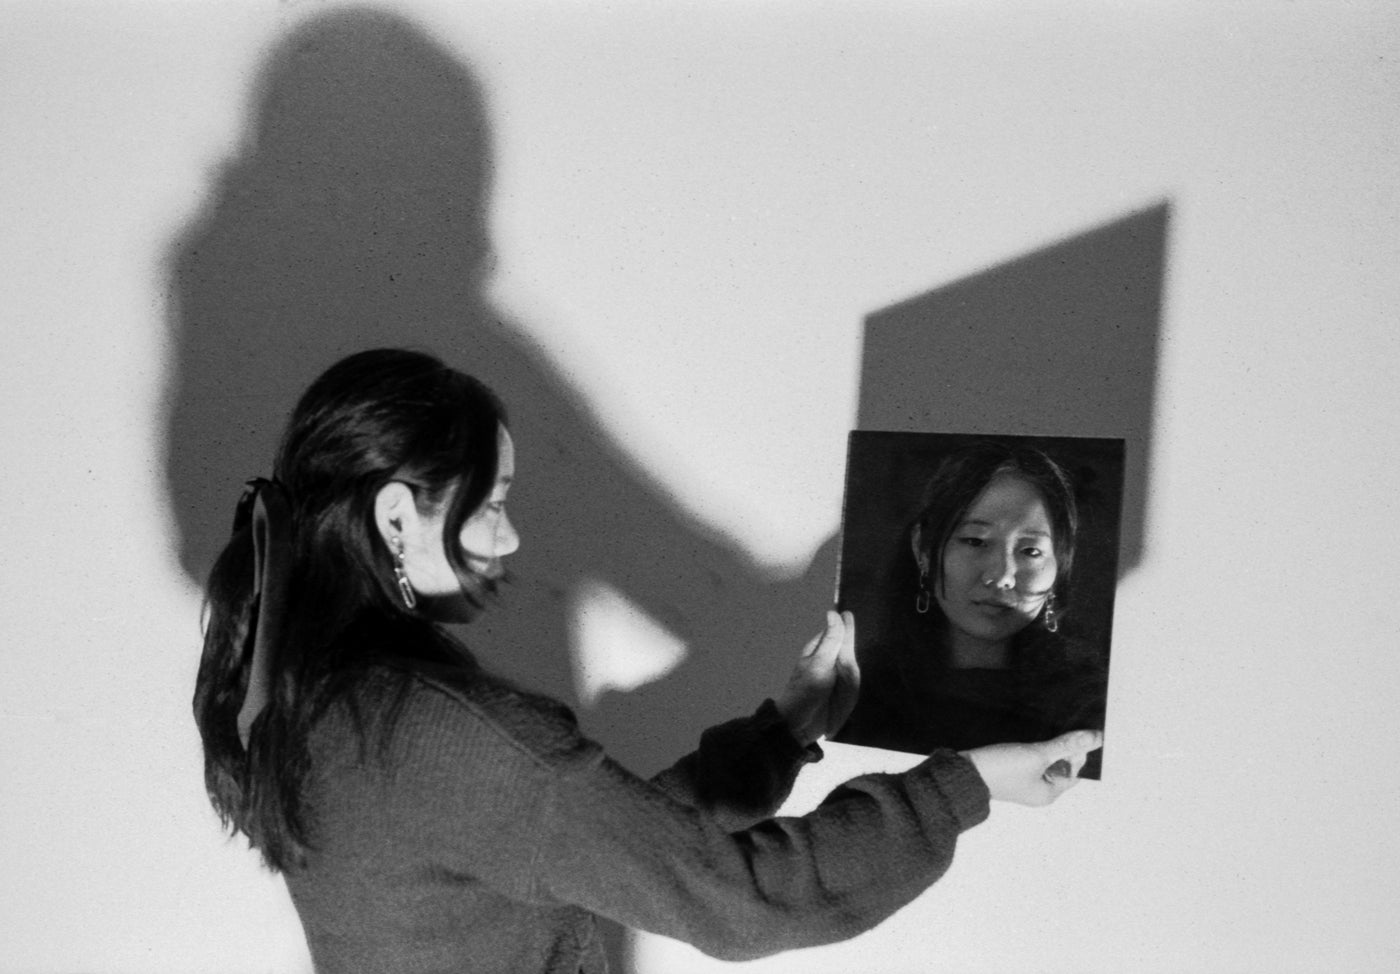 Photograph of person looking in the mirror